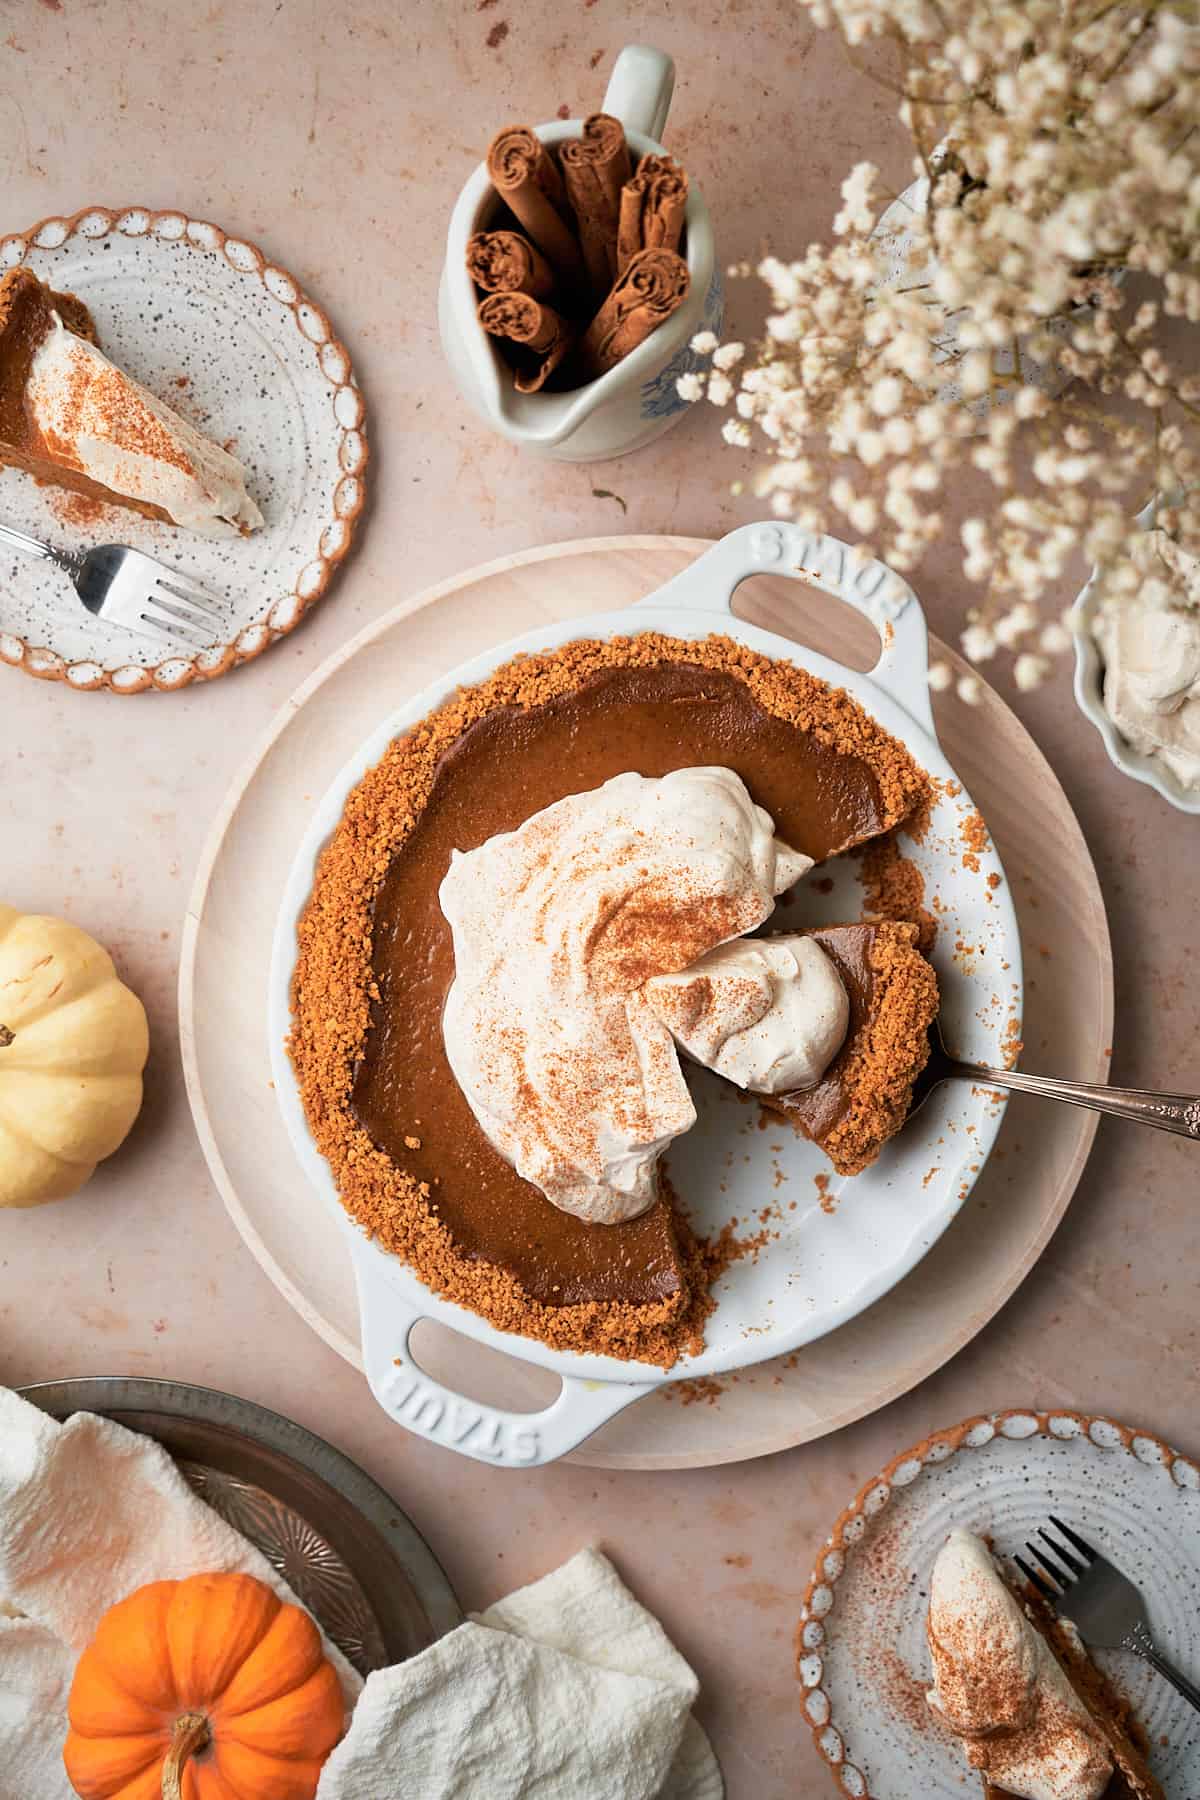 overhead scene of a pumpkin pie topped with a whipped cream topping, with some slices taken out and placed on surrounding plates, with flowers in the corner, small pumpkins, and cinnamon sticks. 